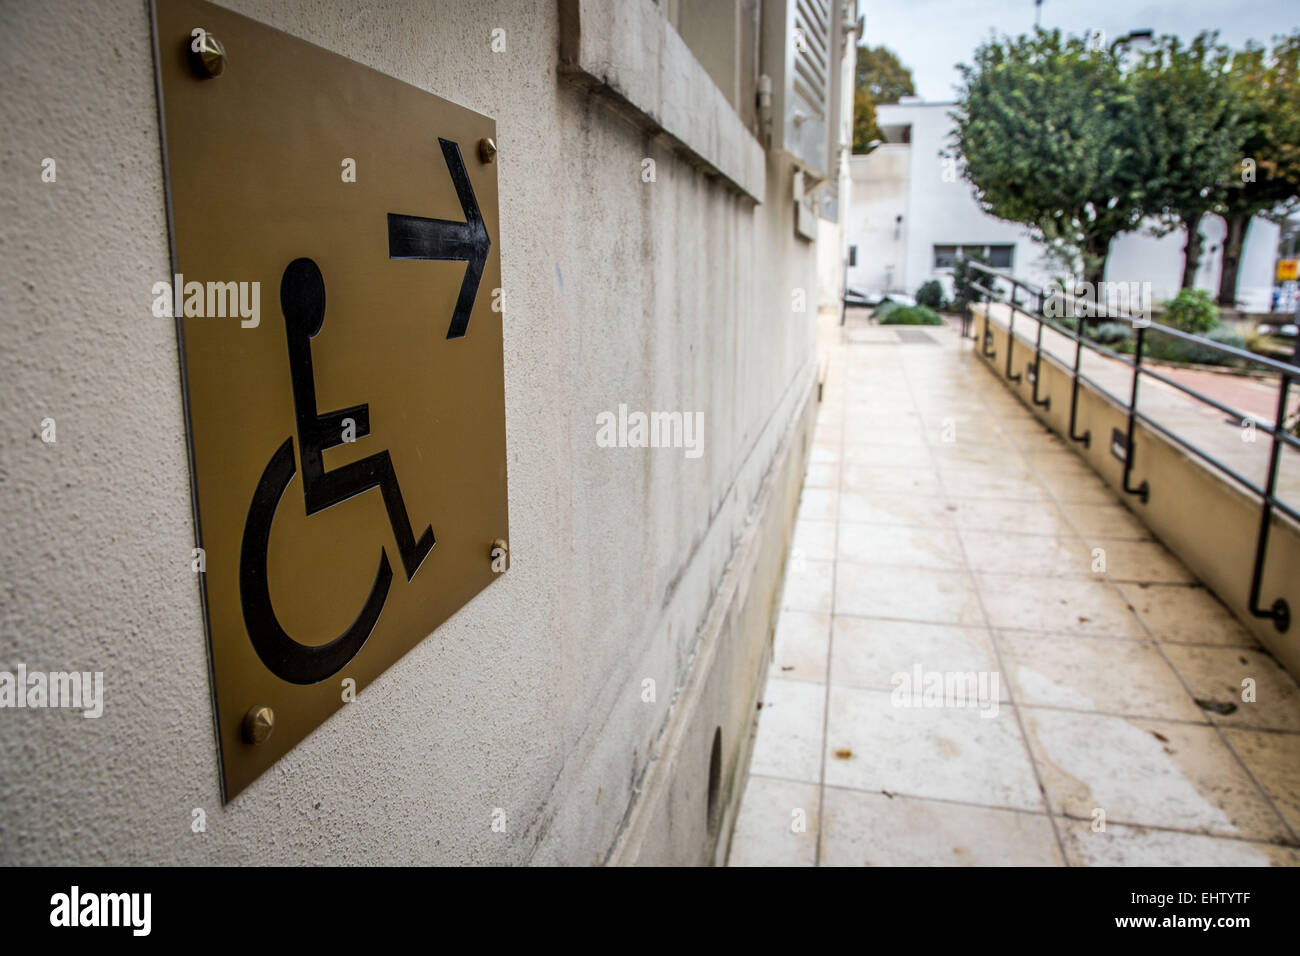 ILLUSTRATION OF ACCESSIBILITY Stock Photo